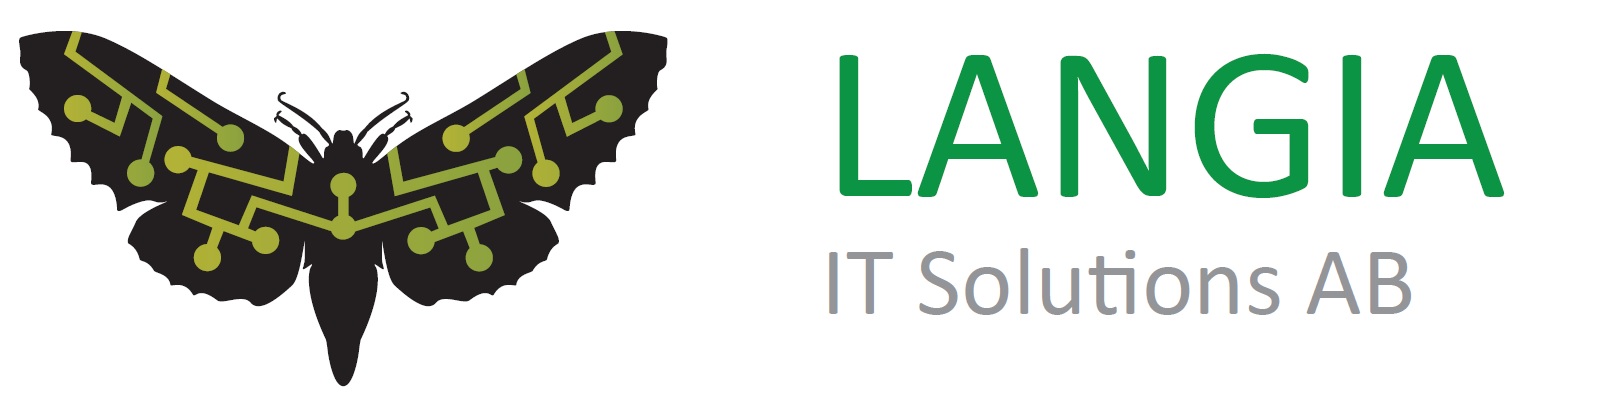 LANGIA IT Solutions AB